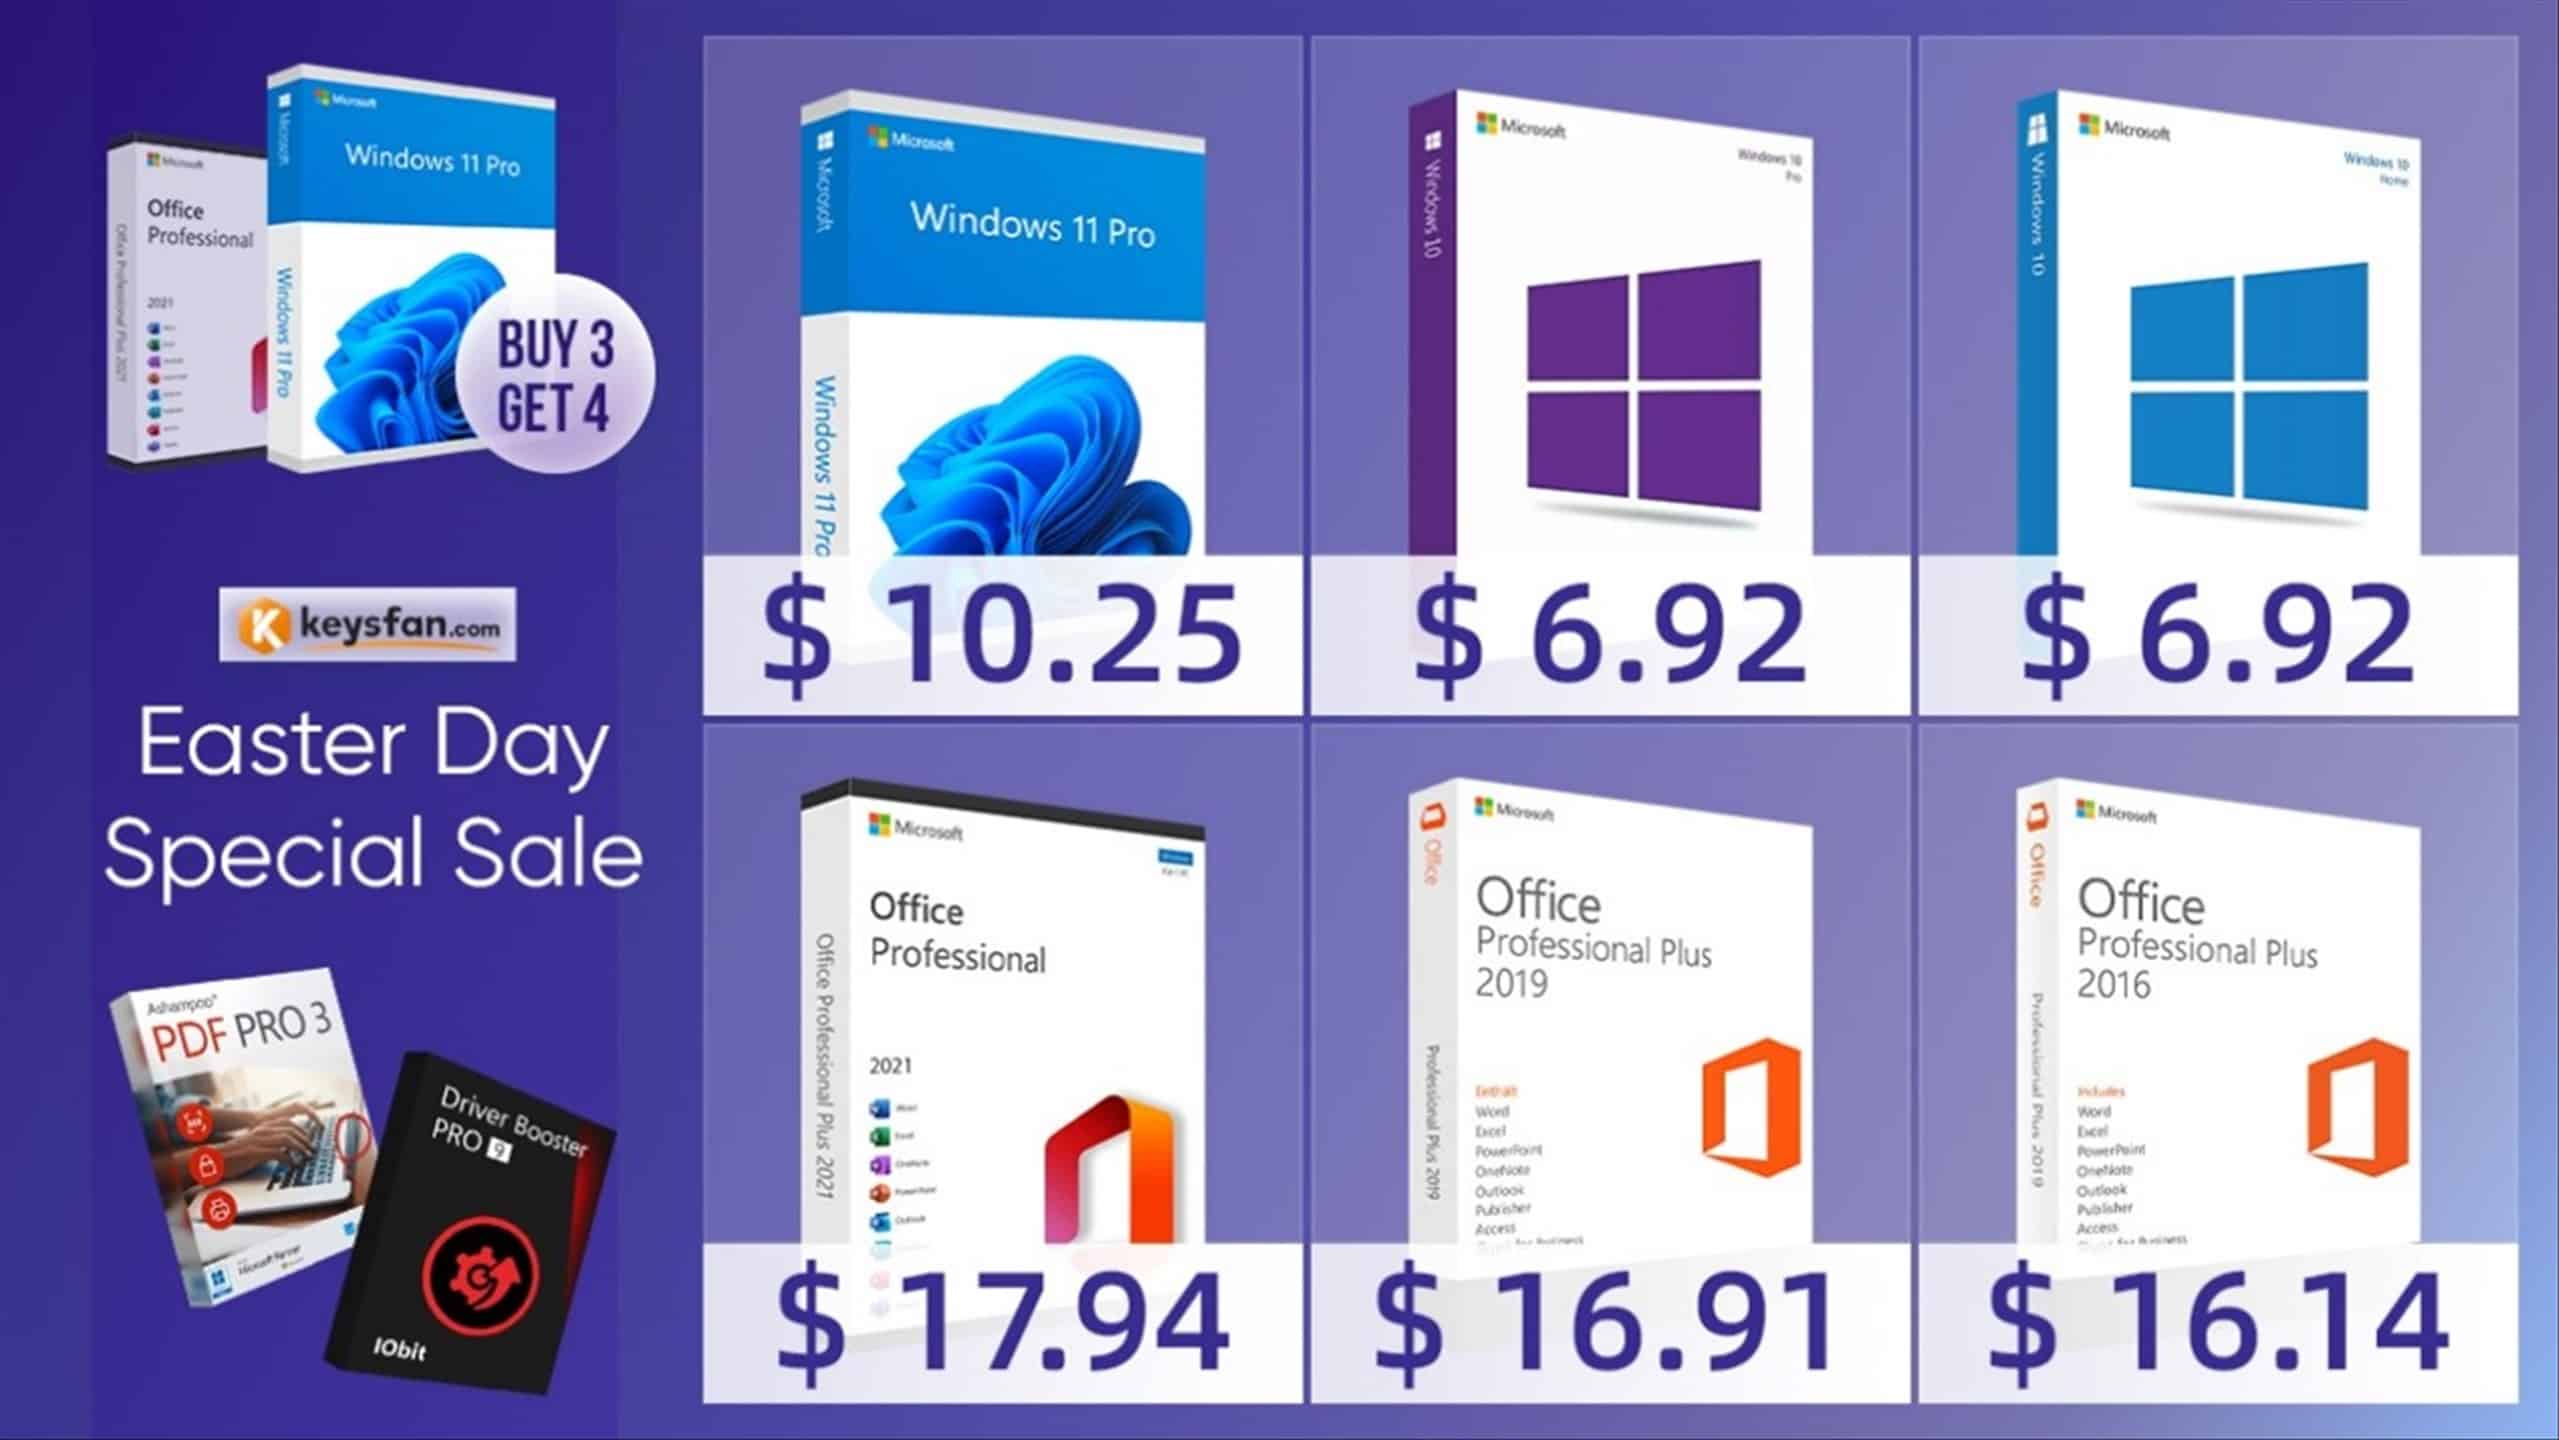 Good News! Windows and Office at the lowest price! All offers are in the Keysfan Easter Sale!